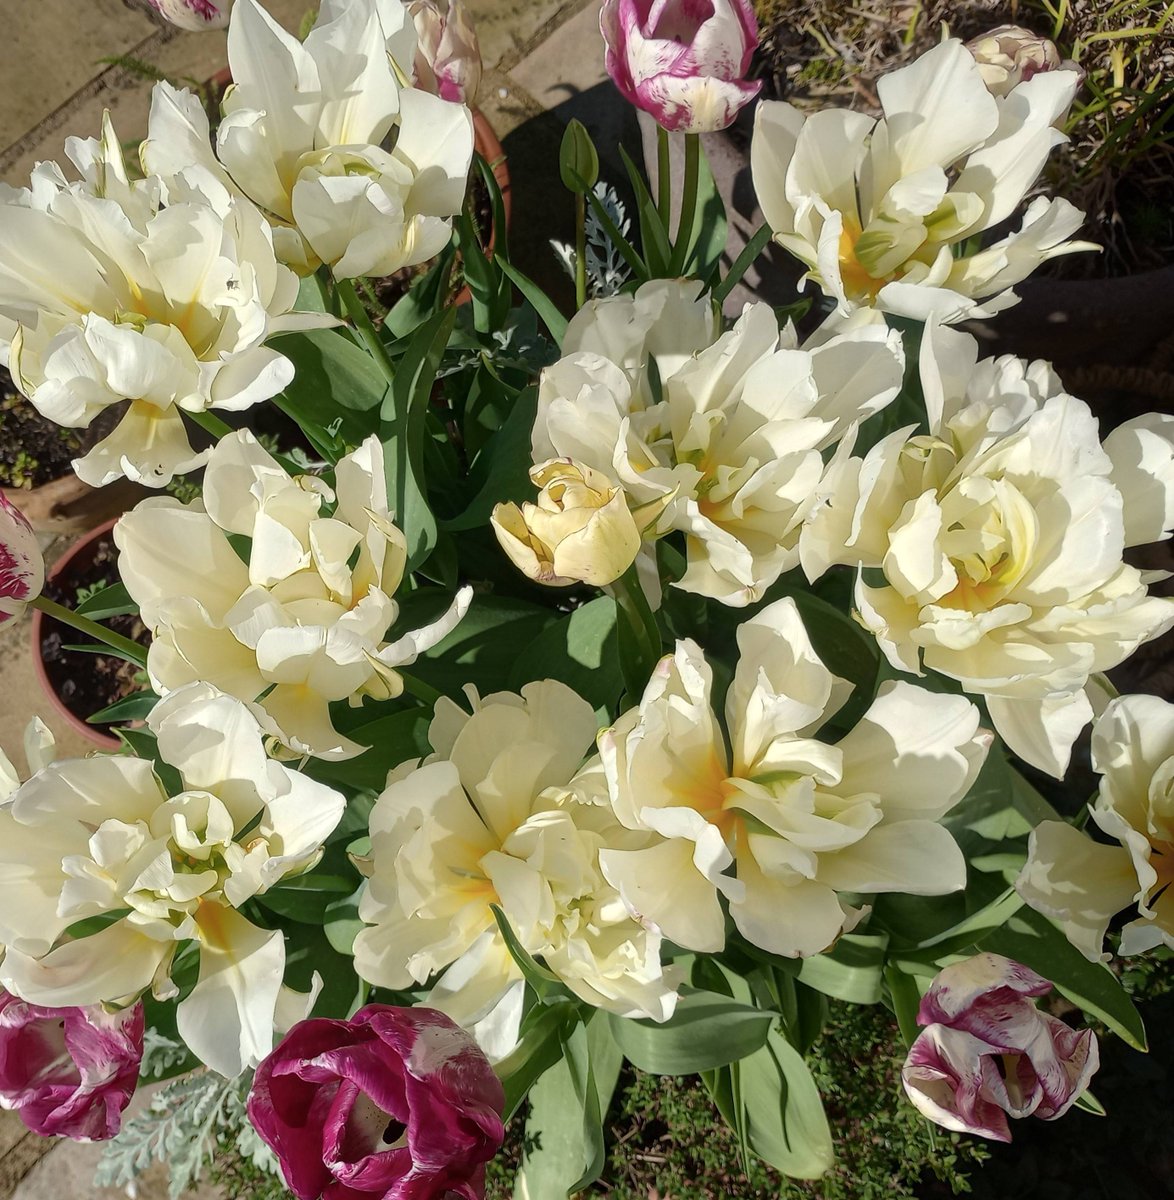 Very pleased with these slightly mad tulips! #springbulbs #springgarden #gardening